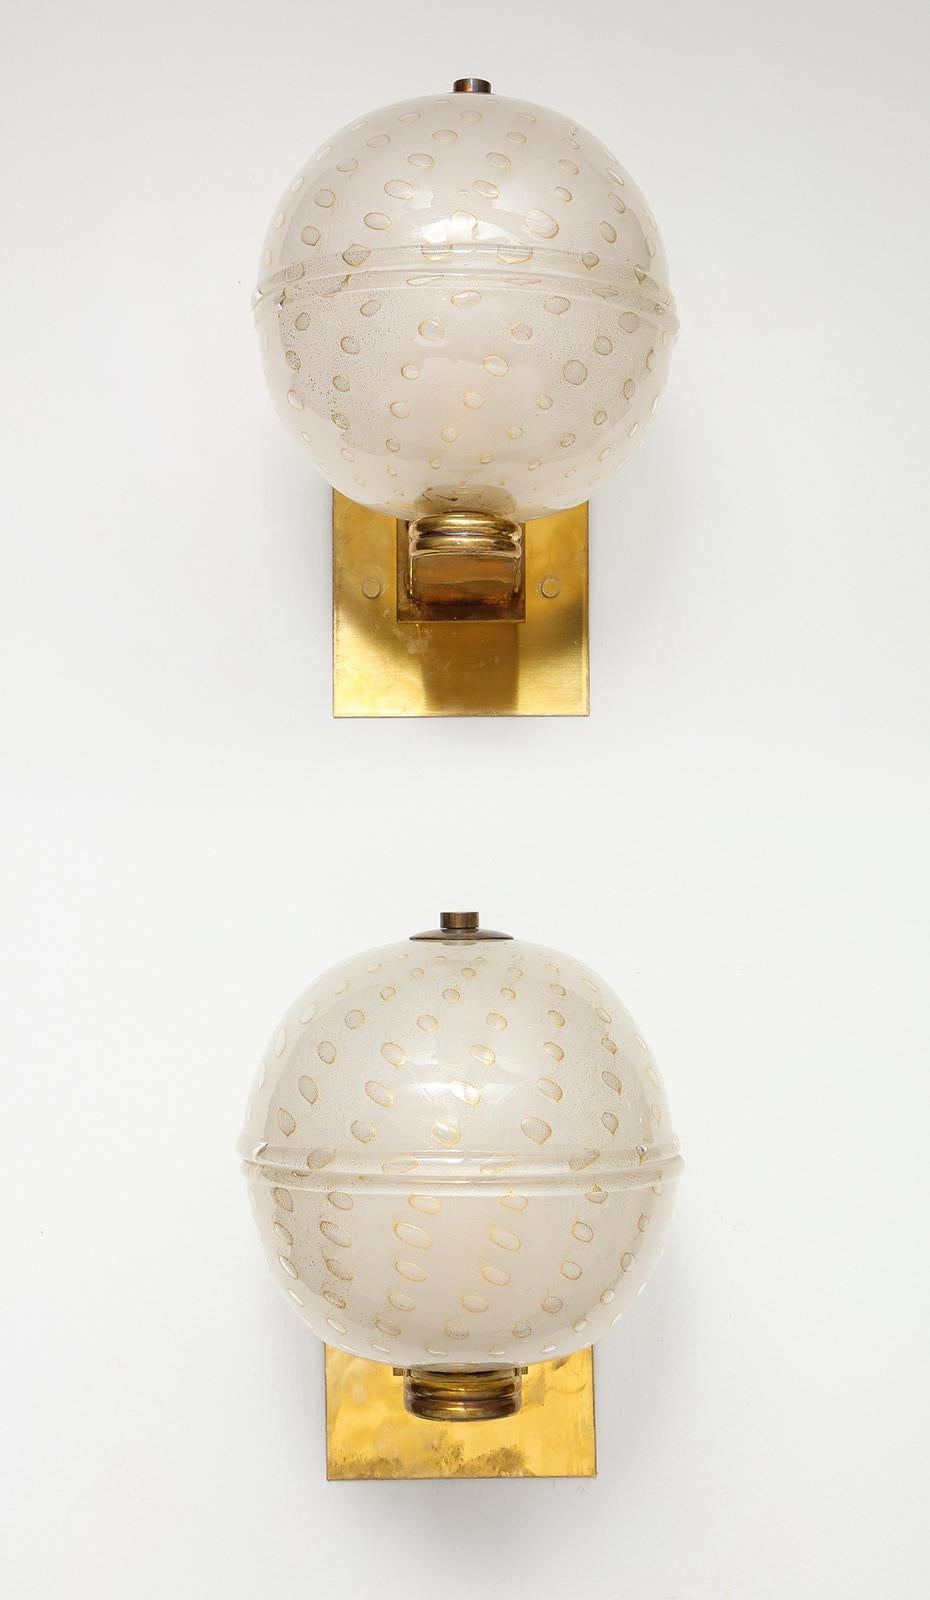 Pair of custom Murano glass sphere-shaped sconces with brass backplates. 
Italy, 21st century. 
The fixture is 9” H – including the backplate. Brass backplate is 4 ¼” x 4 ¼”.
7 ¾” projection from the wall. Globe is 6 ¾”W. Dimensions per each